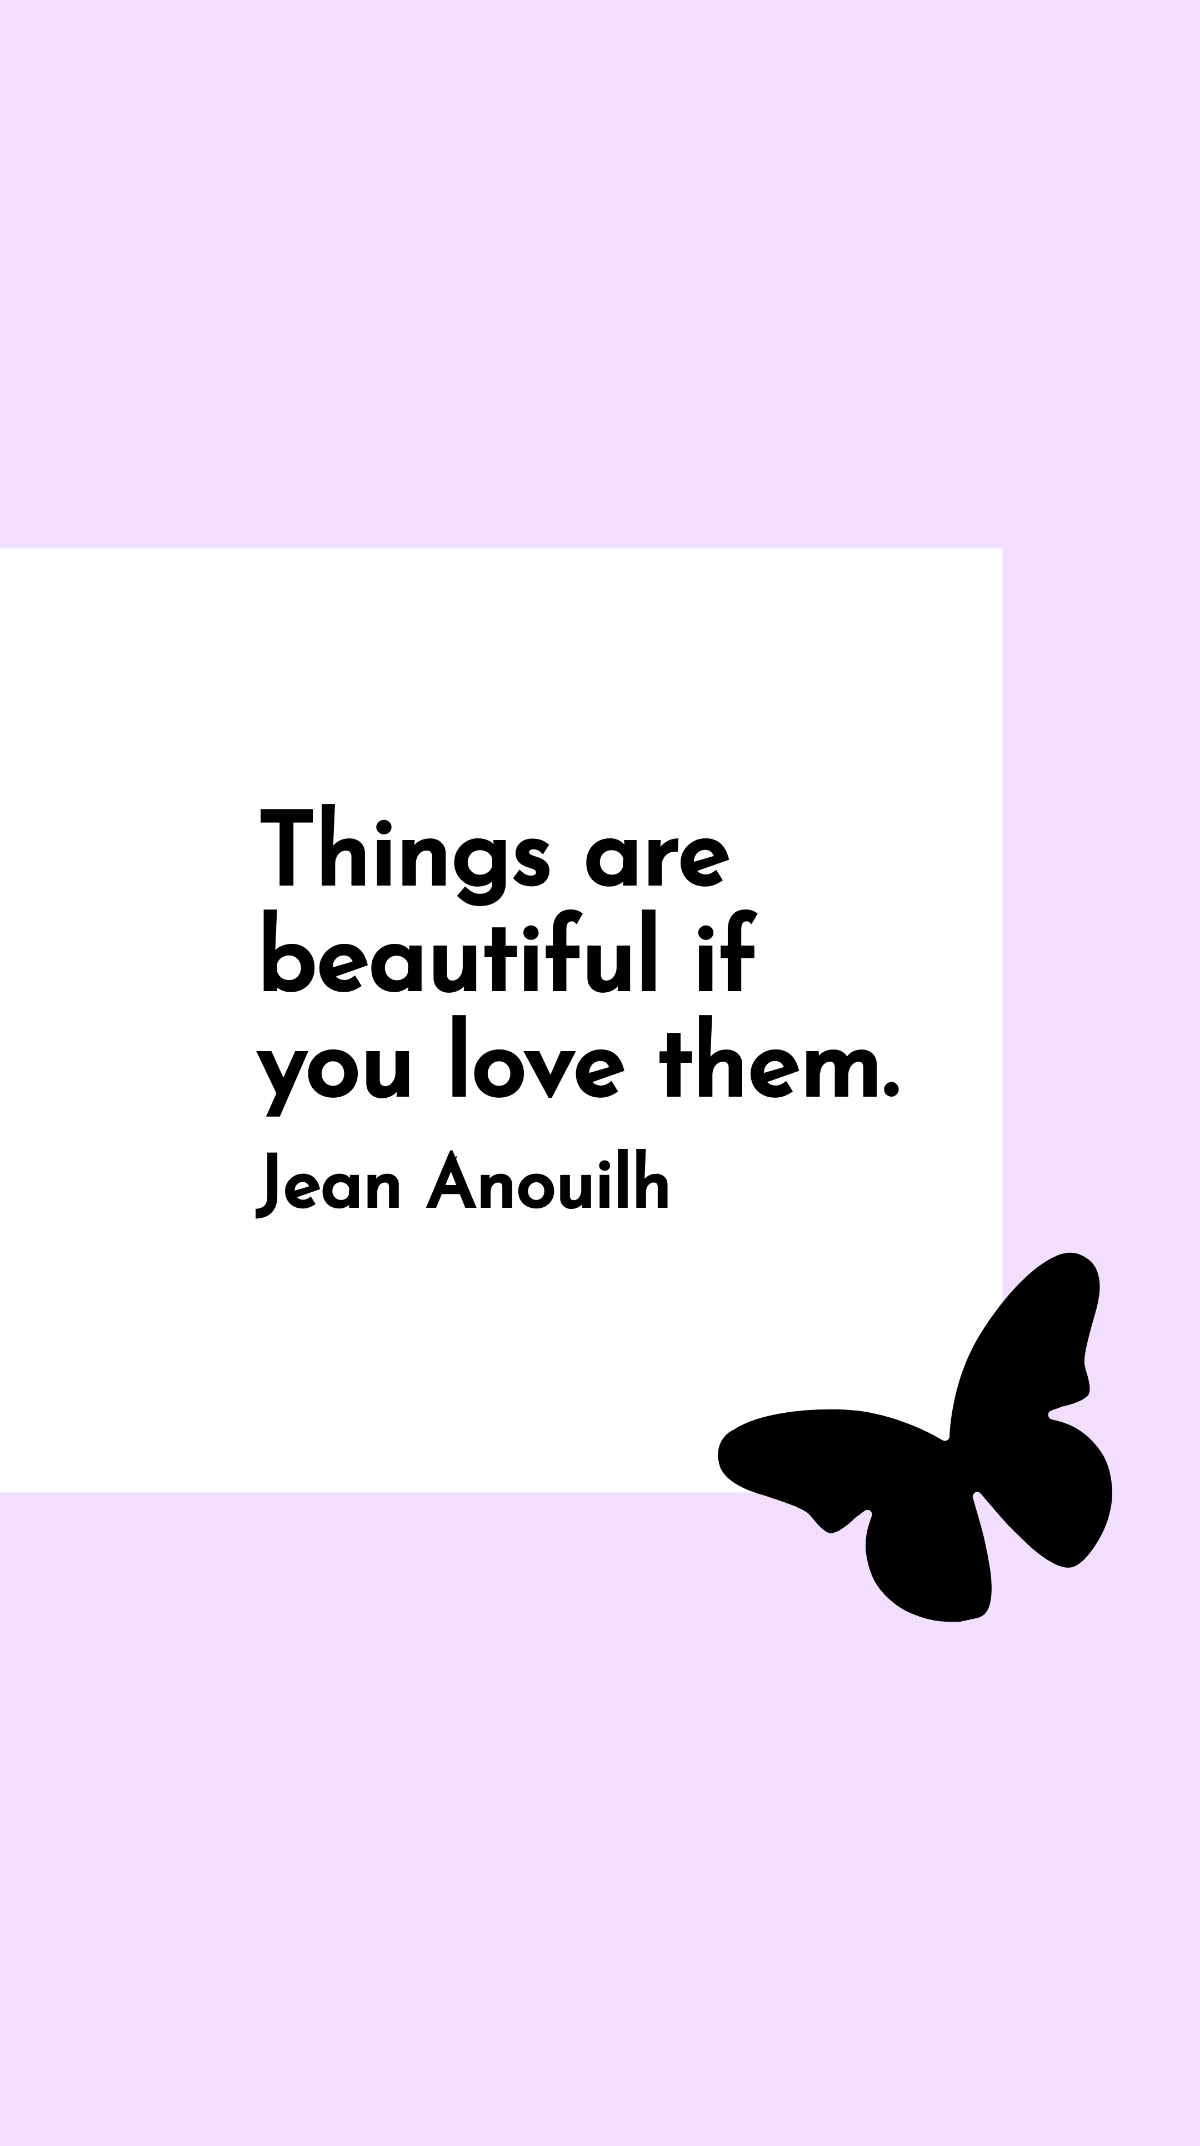 Jean Anouilh - Things are beautiful if you love them. Template